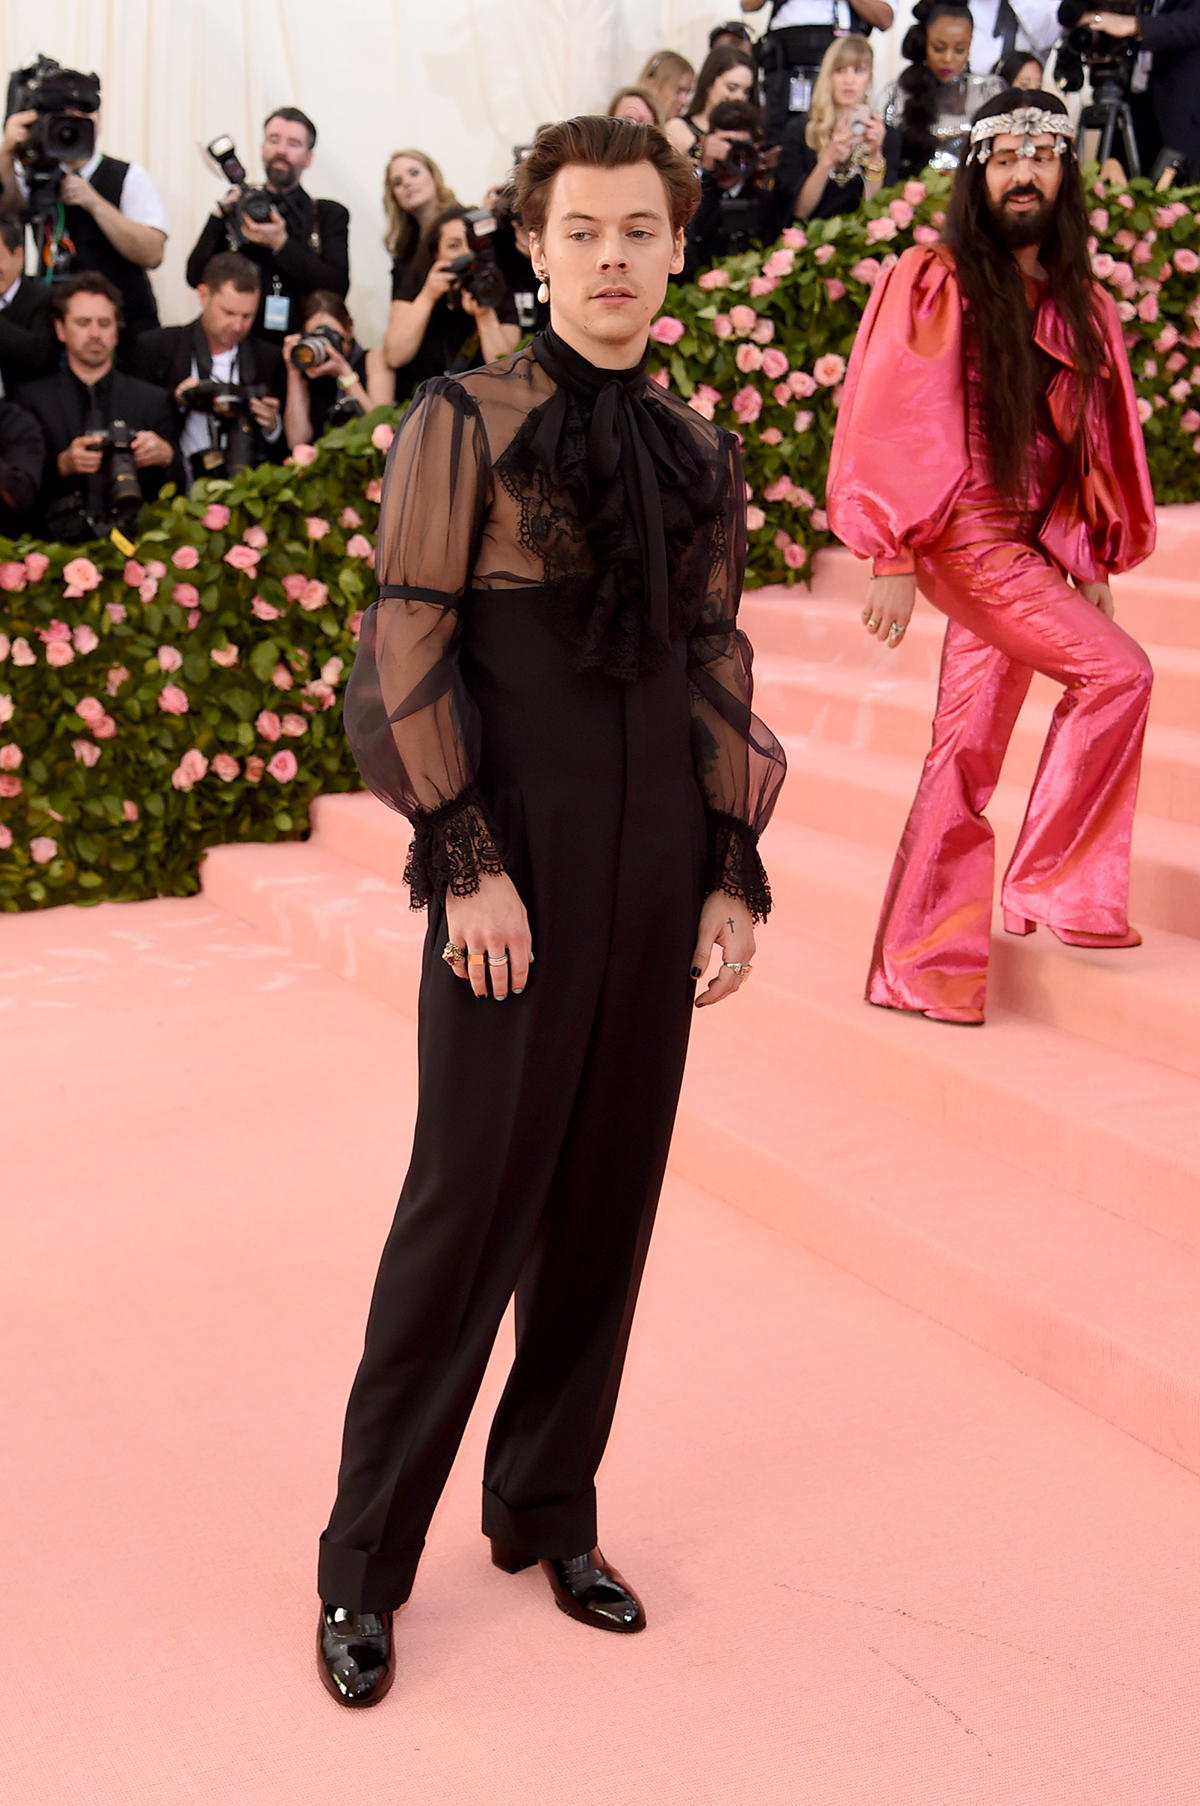 NEW YORK, NEW YORK - MAY 06: Harry Styles attends The 2019 Met Gala Celebrating Camp: Notes on Fashion at Metropolitan Museum of Art on May 06, 2019 in New York City. (Photo by Jamie McCarthy/Getty Images)